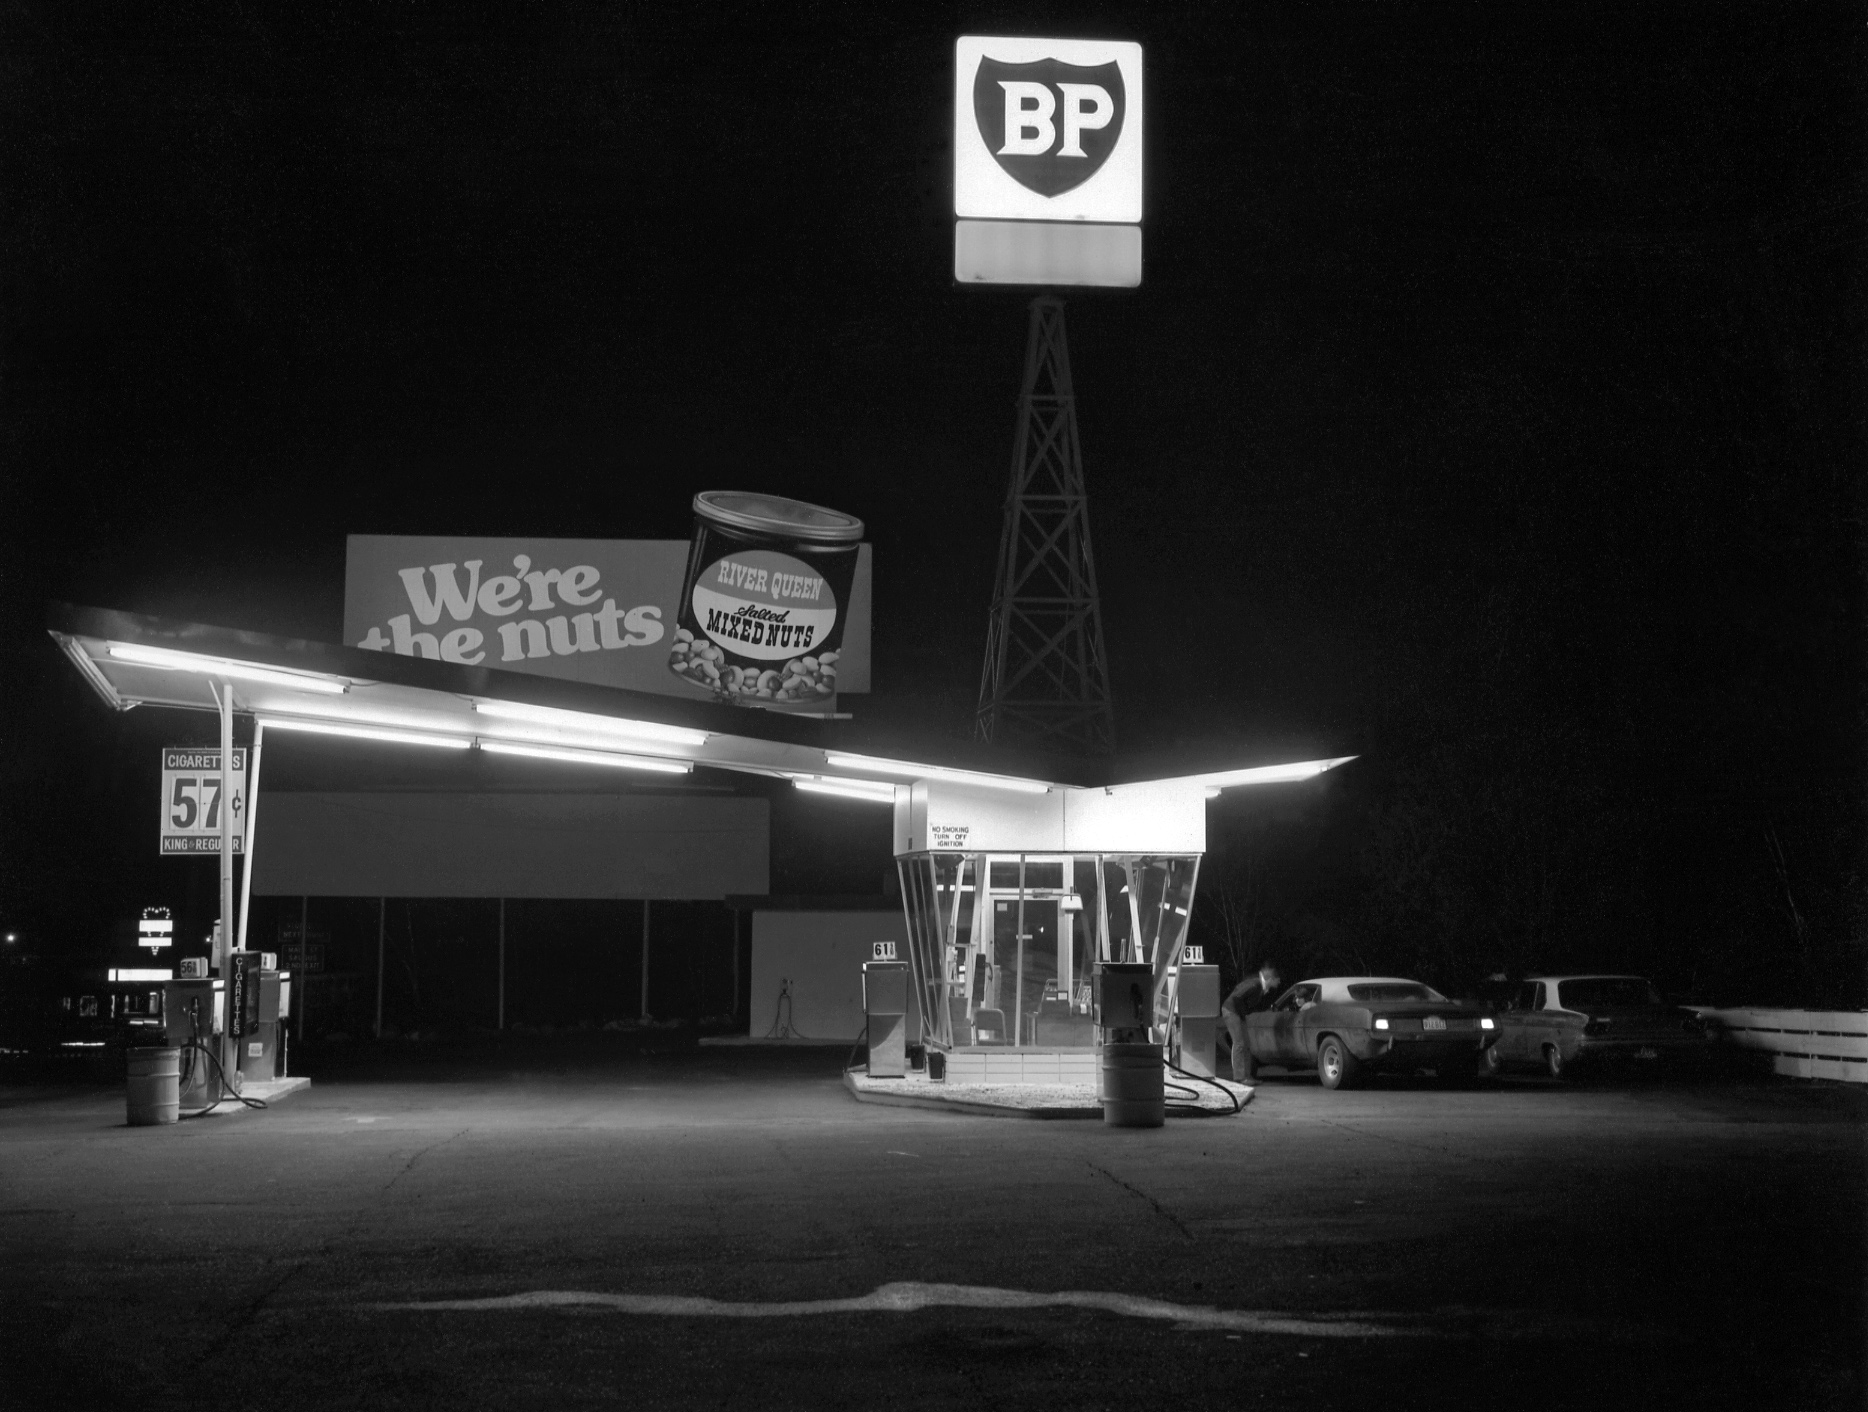 It was a warm late September night on Route 1 near Saugus, Mass., sometime around 1977. Smokes were 57 cents and gas was 56. Taken for a photography class with a 4x5 view camera. View full size.